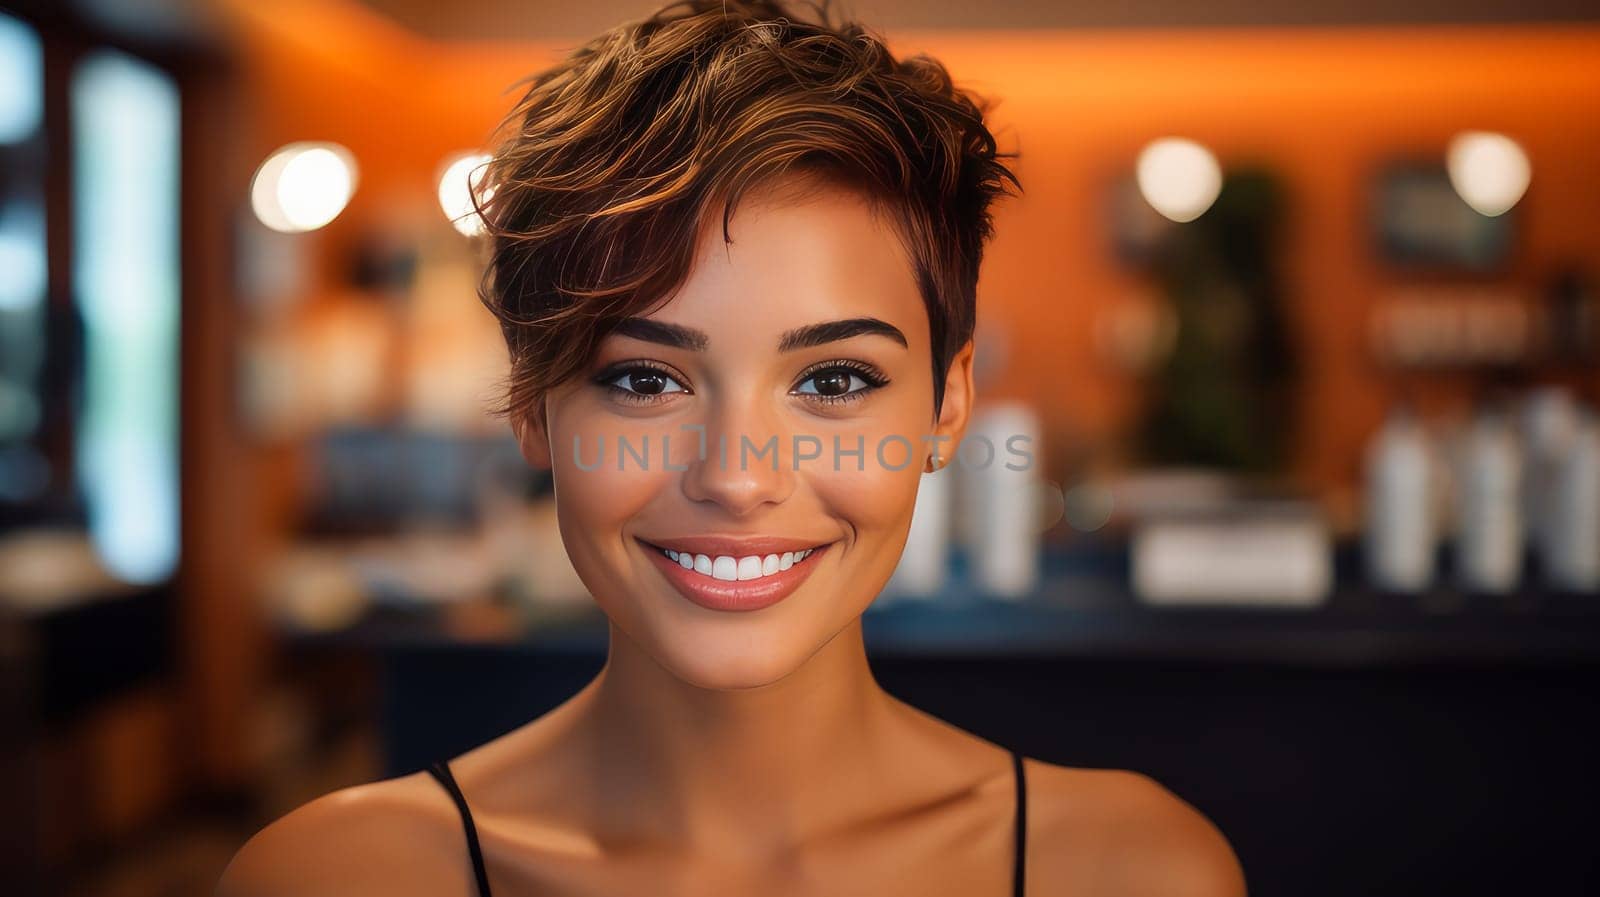 Beautiful, elegant, sexy Latina, Spain with short haircut, woman with perfect skin, orange background, banner. Advertising cosmetic products, spa treatments, shampoos and hair care products, dentistry and medicine, perfumes and cosmetology for women